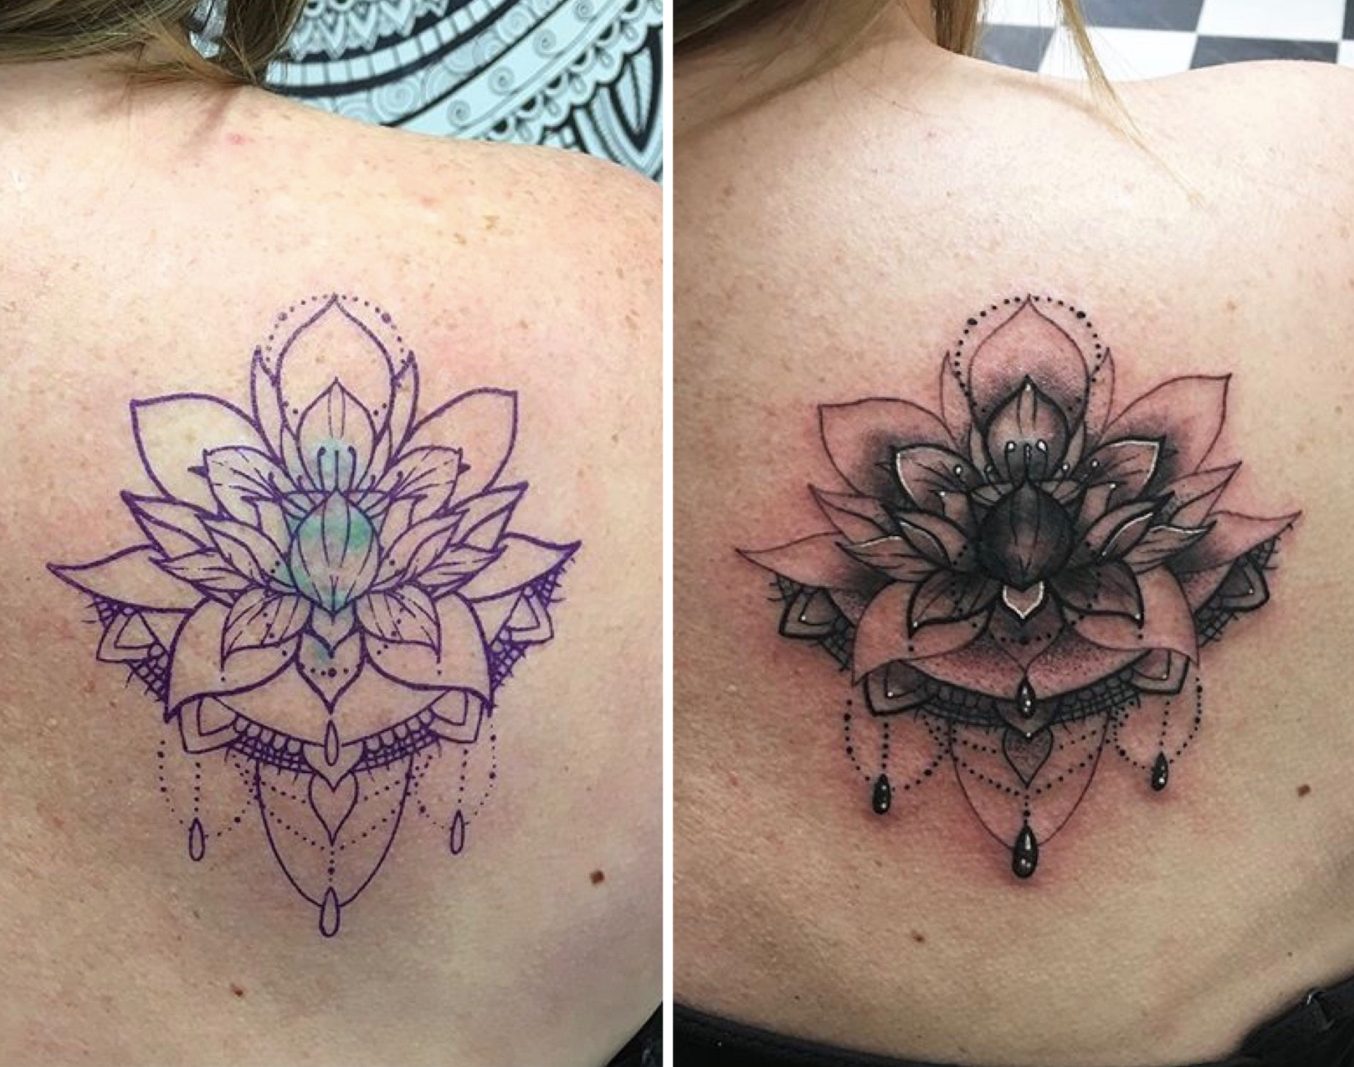 Lotus flower coverup tattoo by ree1986 on DeviantArt